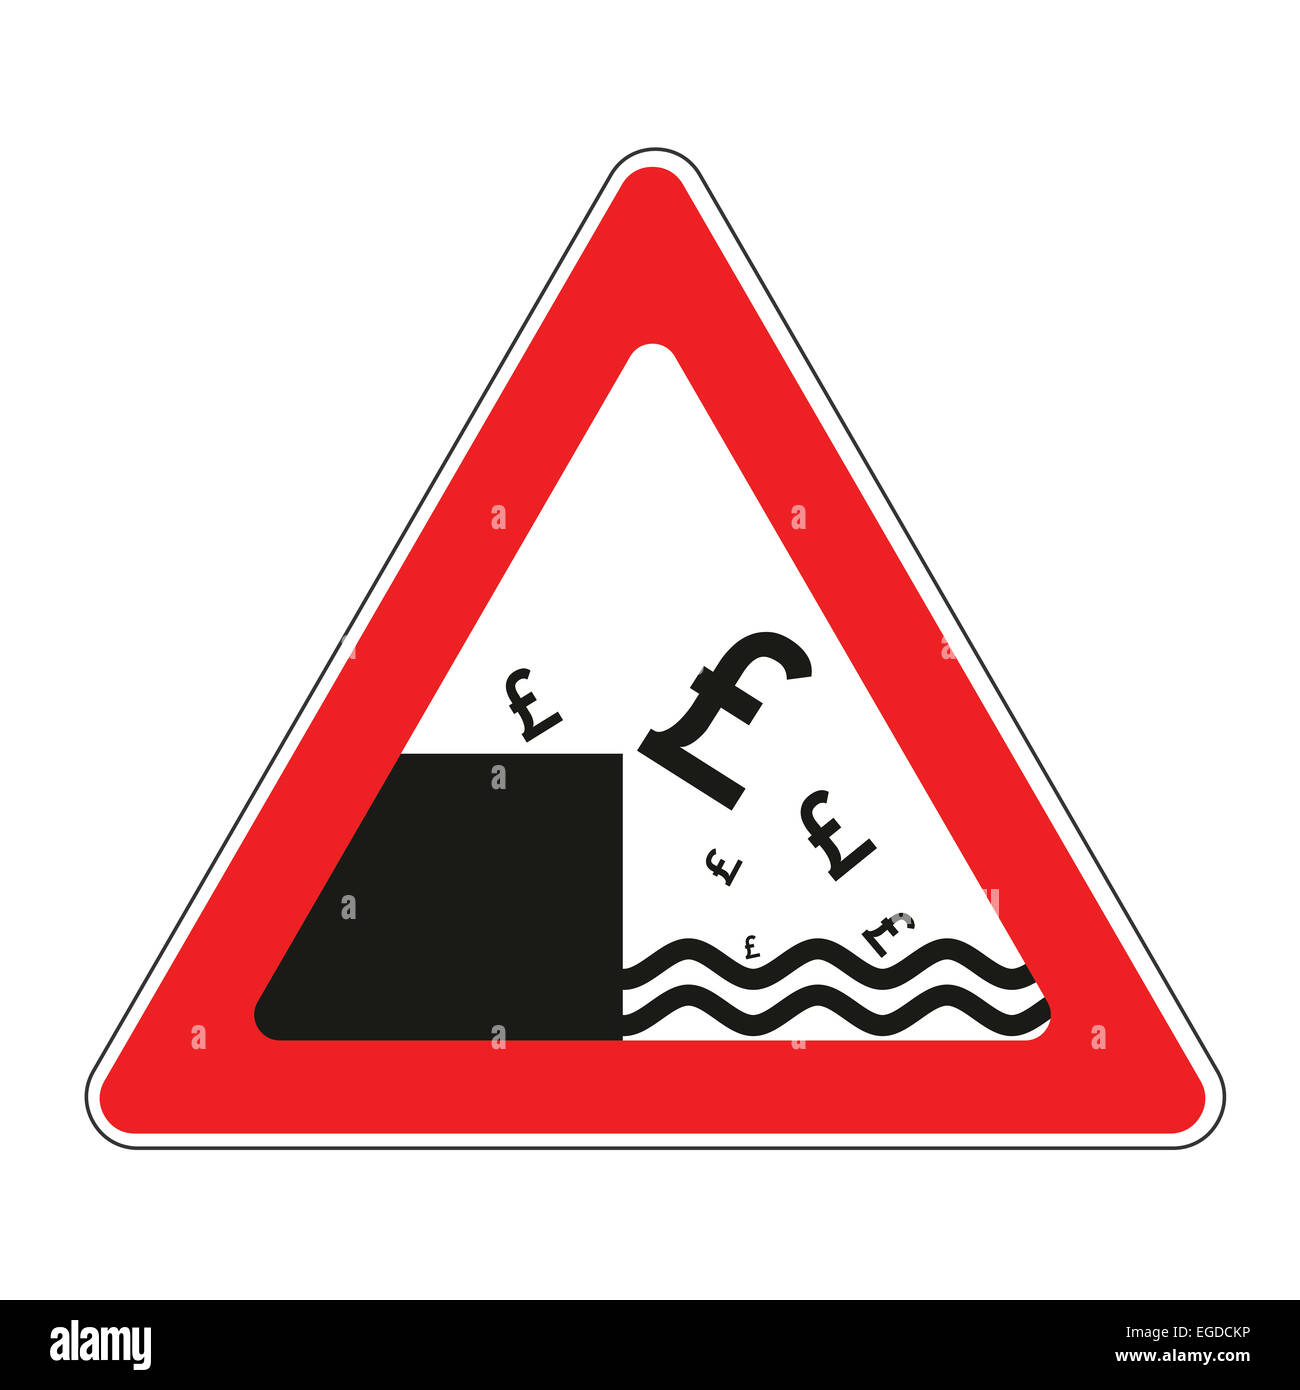 Illustration of road sign with British pound currency decline concept Stock Photo